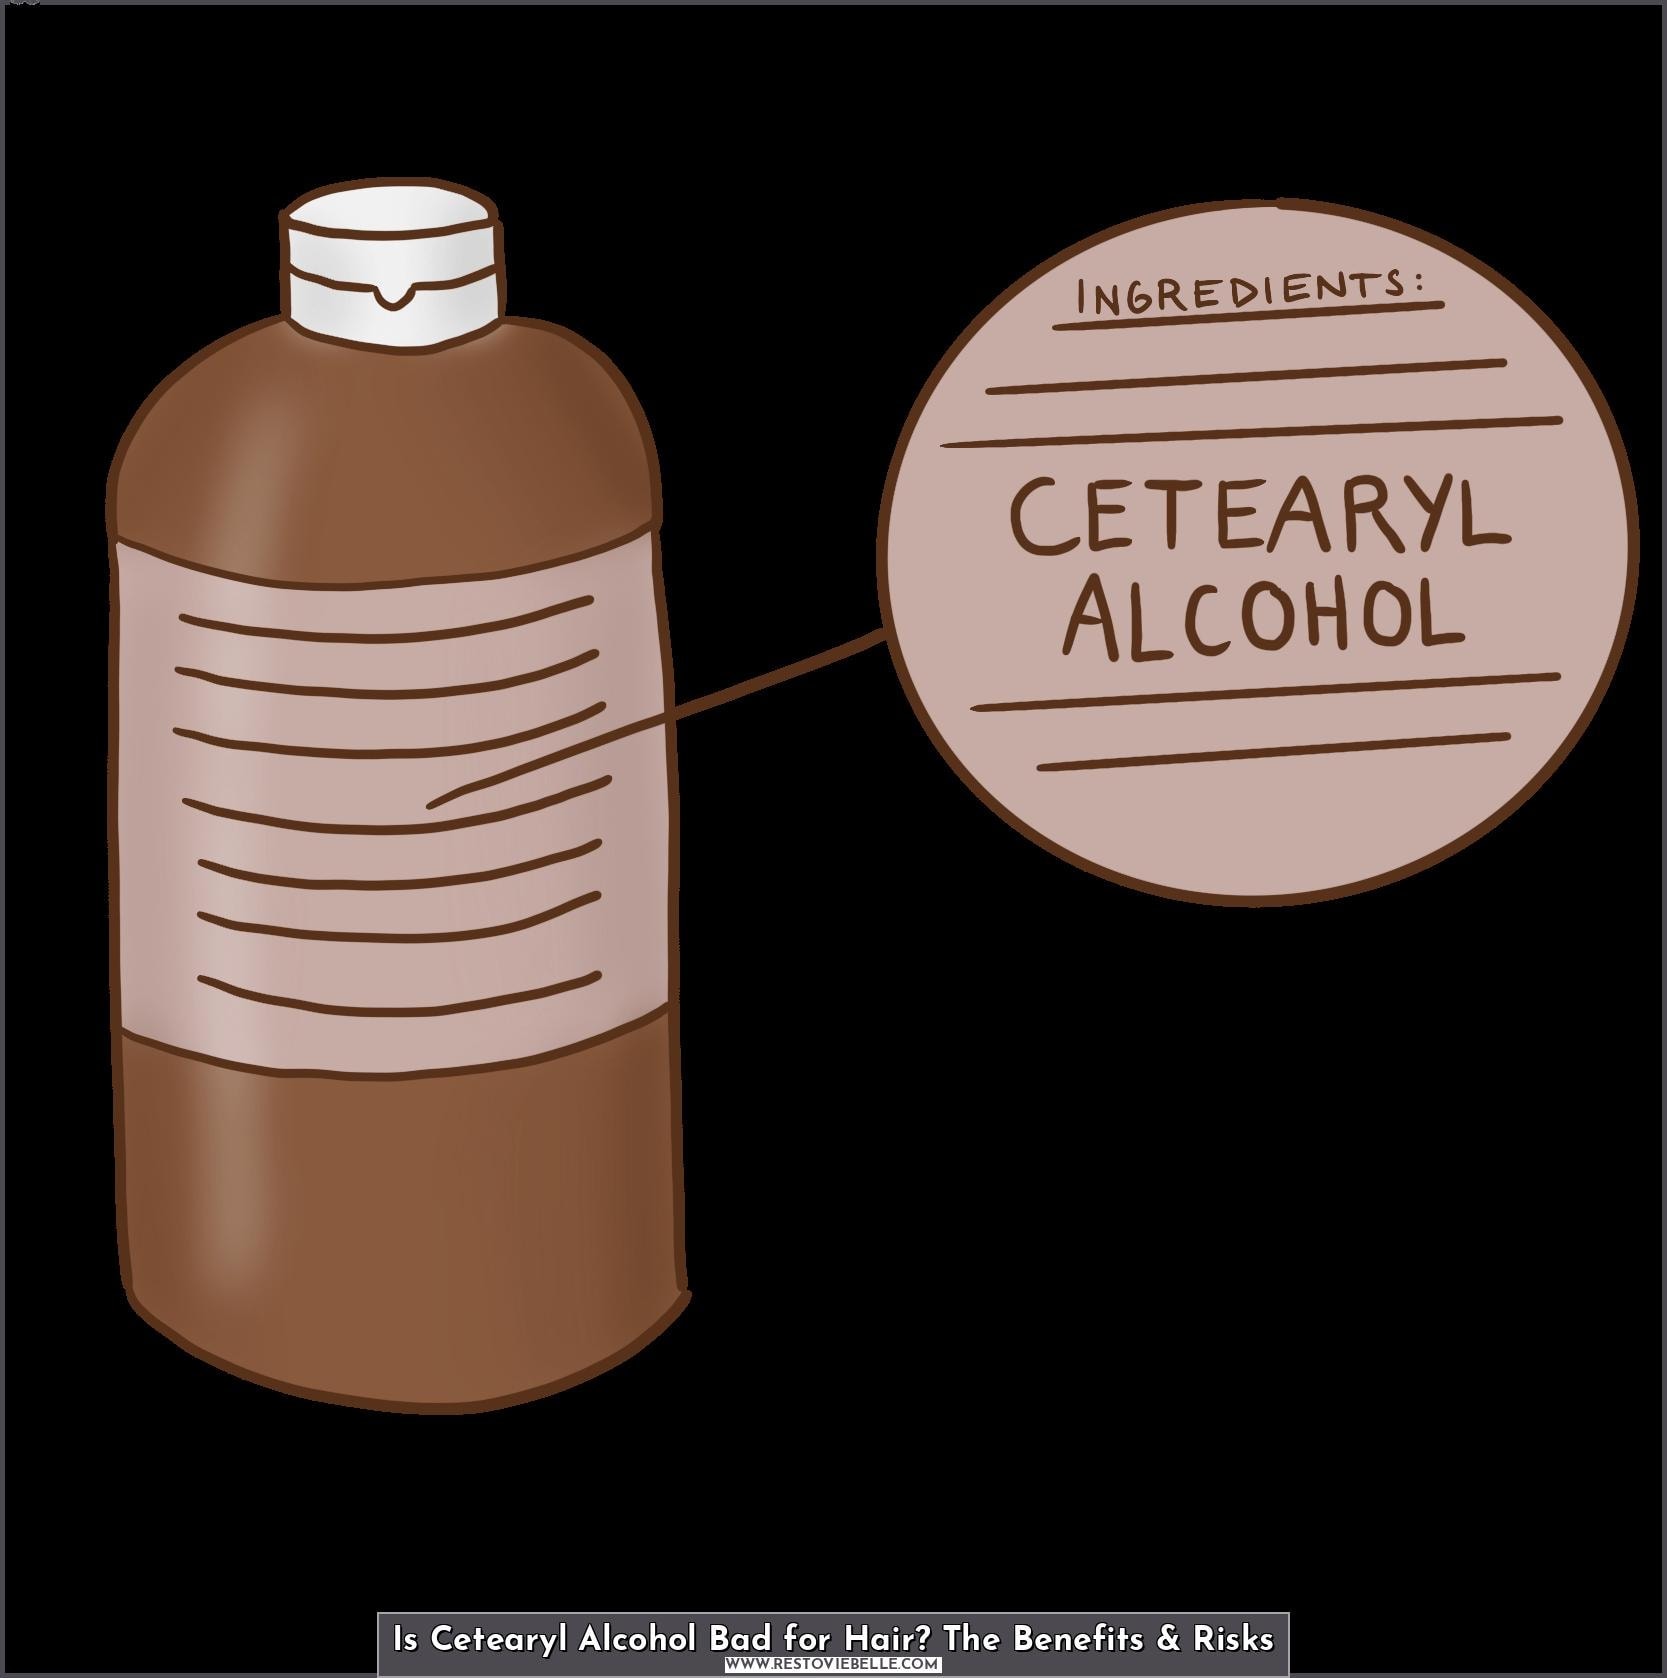 Is Cetearyl Alcohol Bad for Hair? The Benefits & Risks